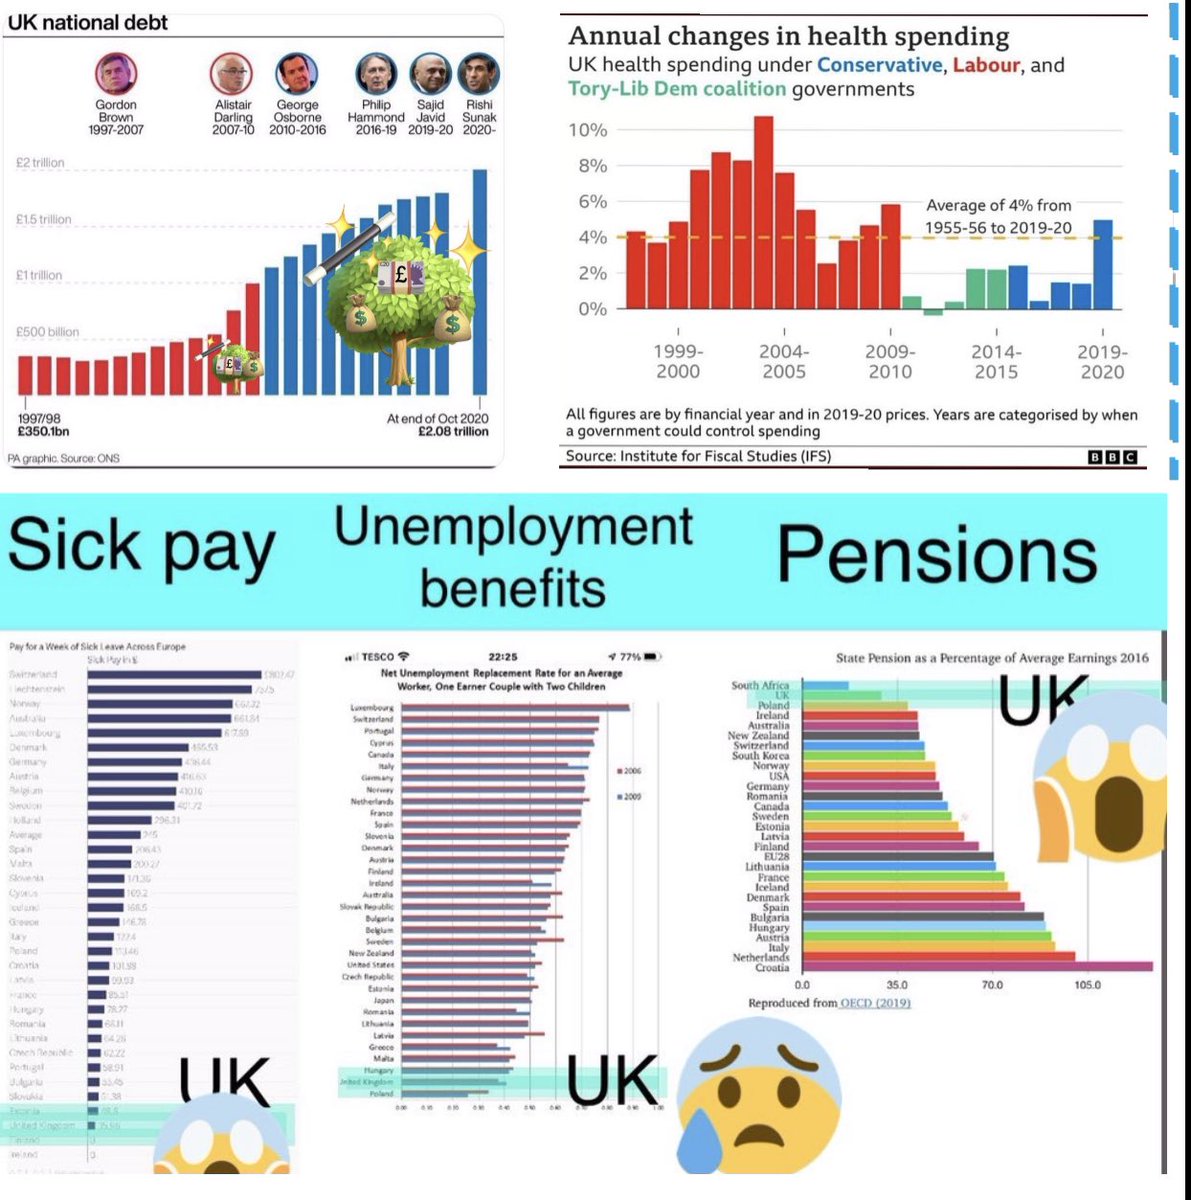 @SuzieWo20886208 @CounsellingSam Uncomfortable truths for the Tories in 2017 Tories got 42.4% Corbyn’s Labour got 40% Too close for the establishment so the character assassination began 61% of UK Now want to rejoin the EU Labour pays off National debt.. Tories despite austerity and high taxes increase it